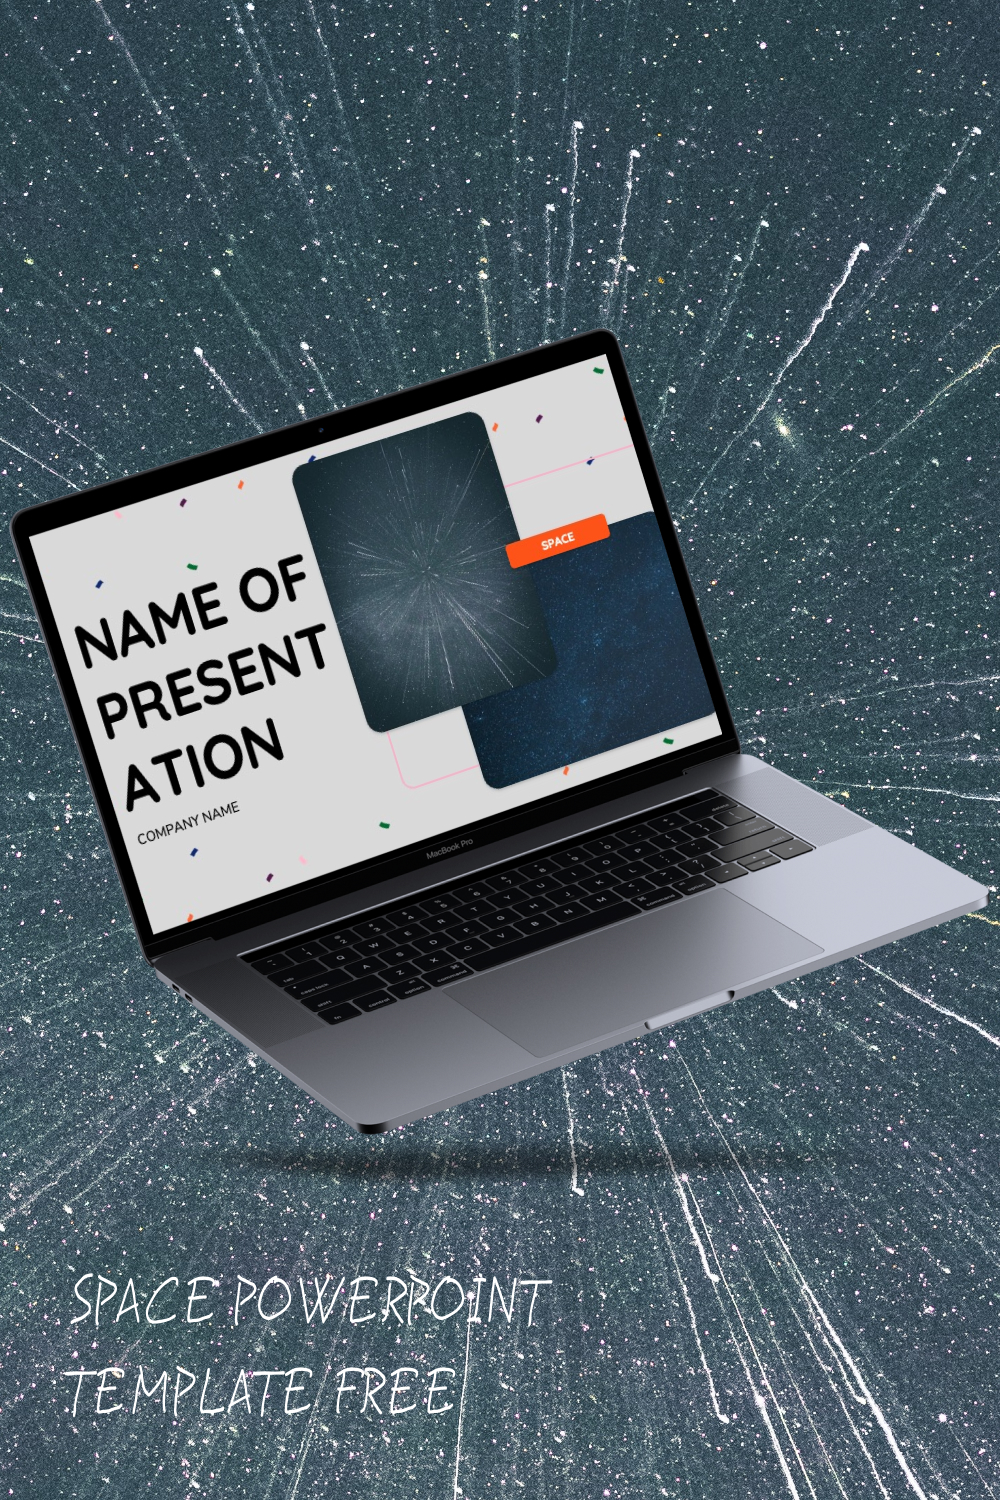 Space powerpoint template of pinterest.